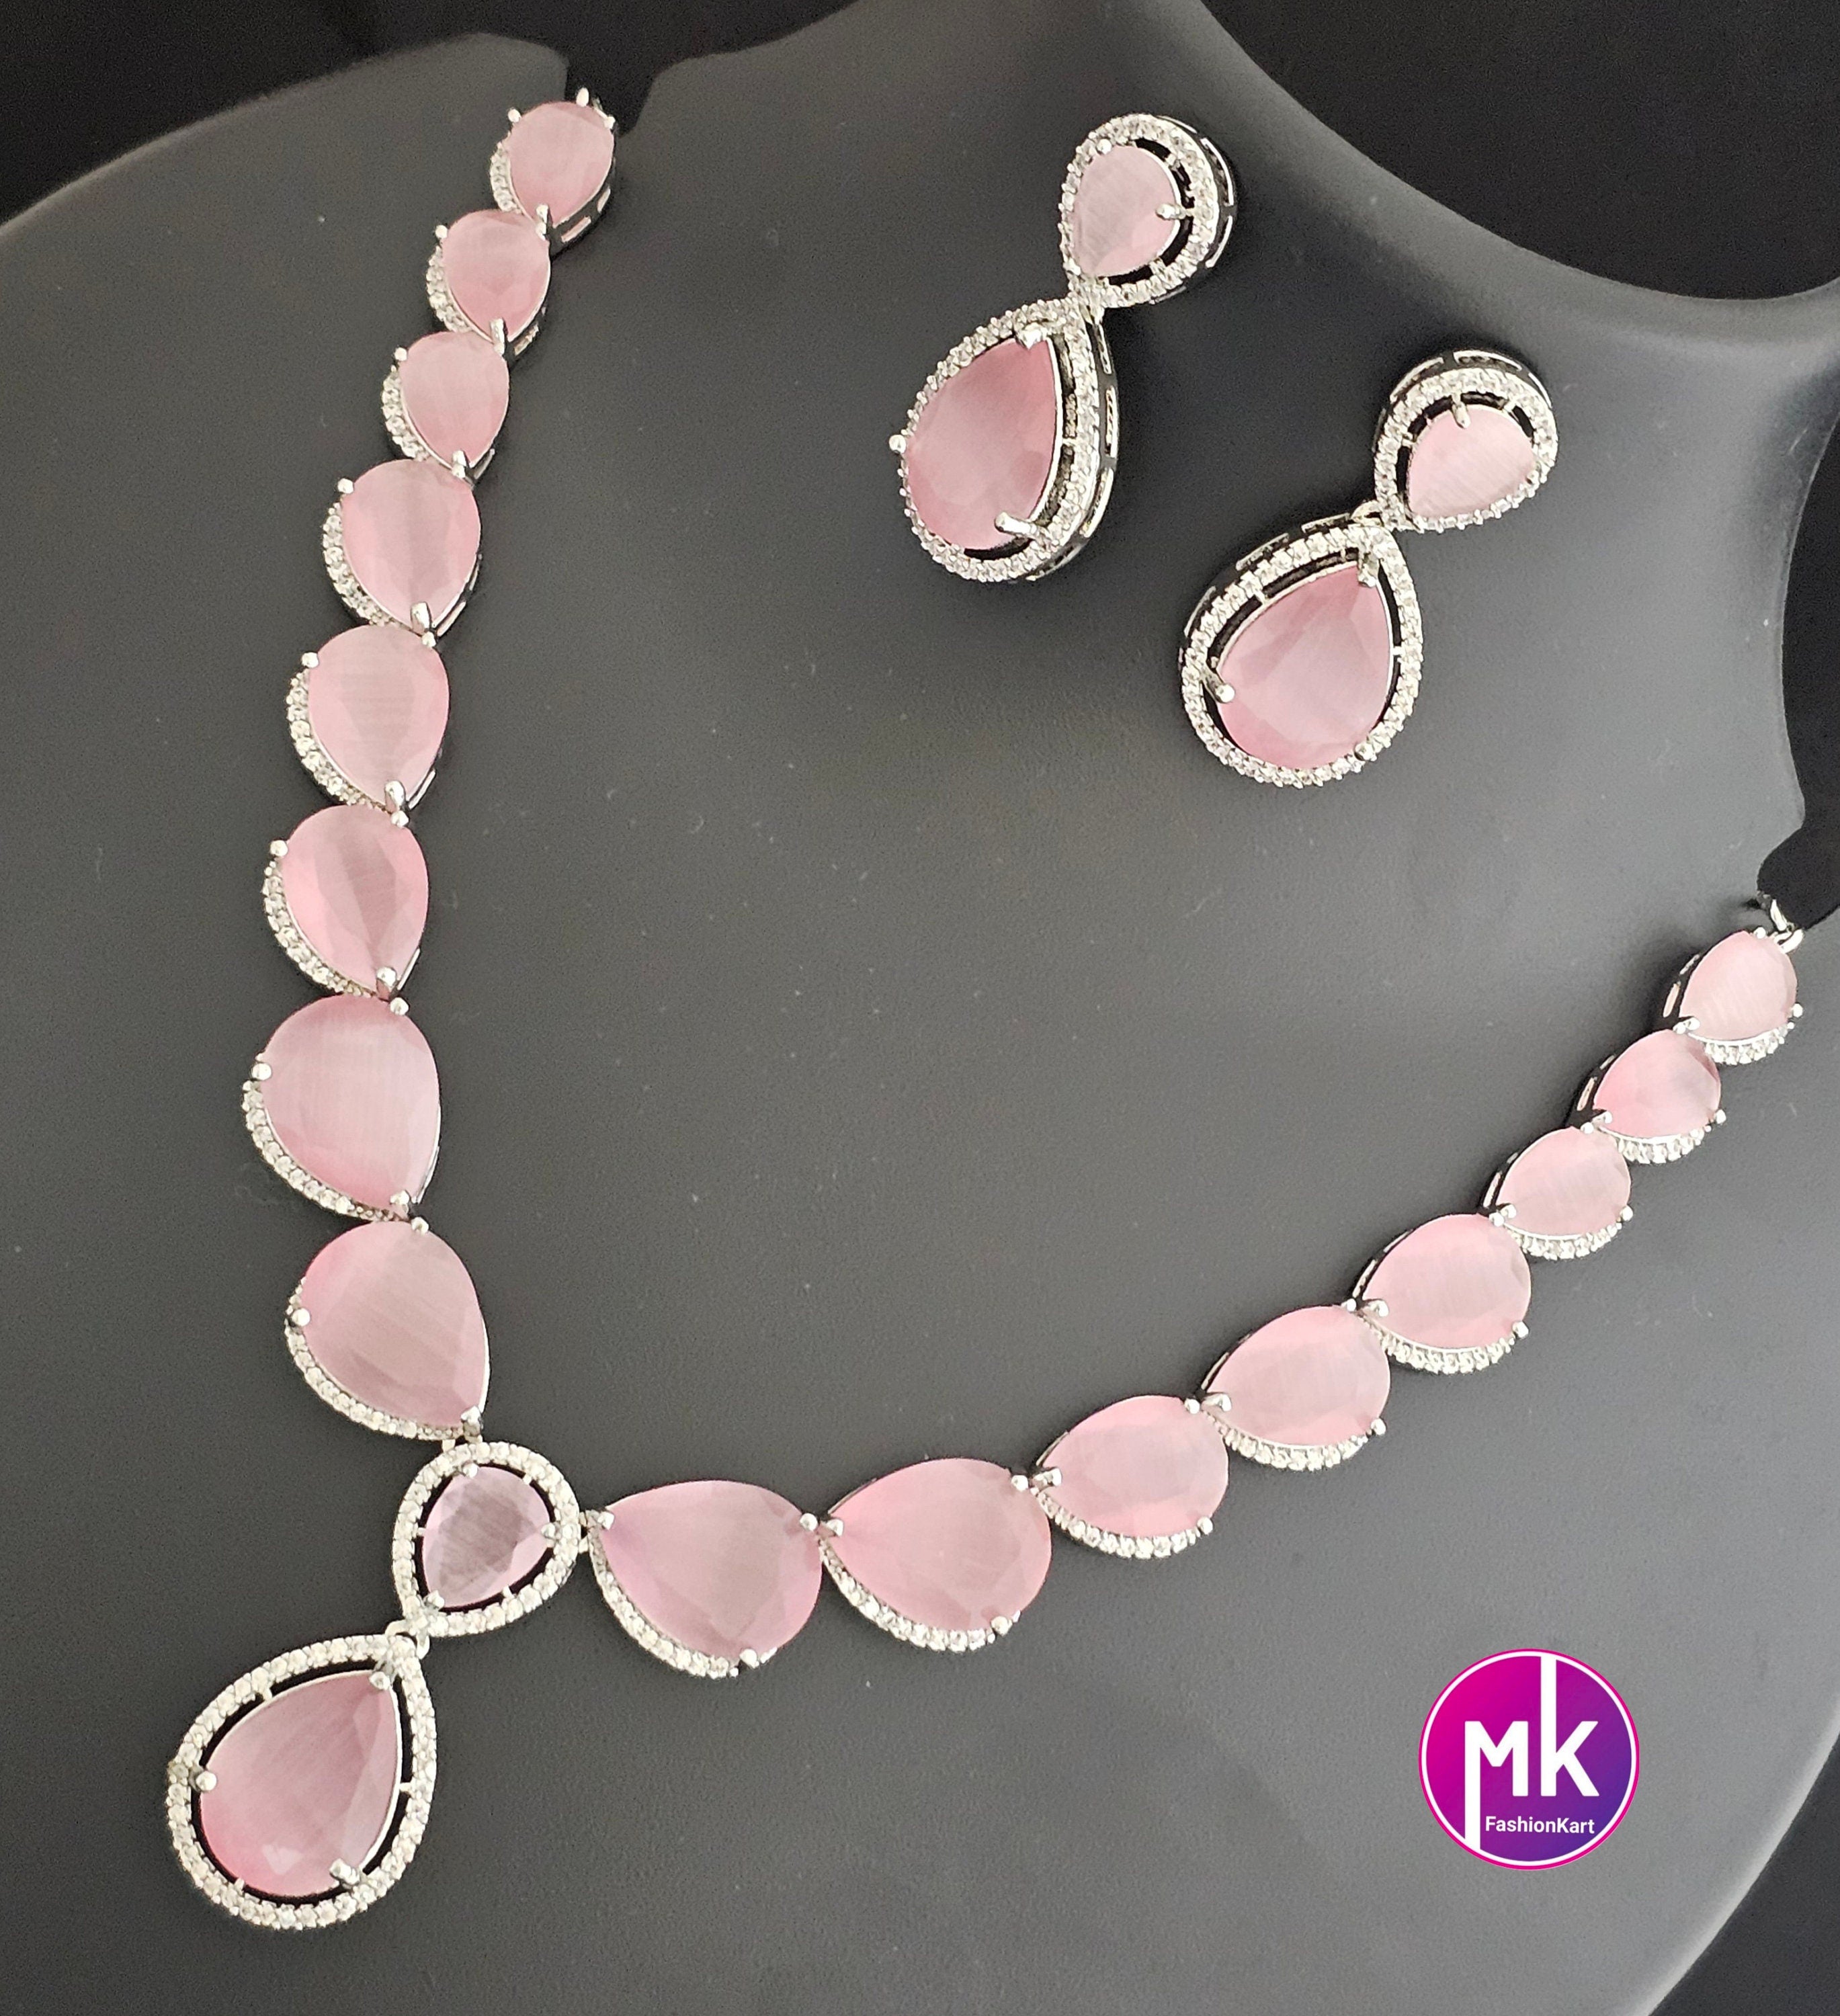 American Diamond Silver Finish AD Stone Baby pink Necklace with Earrings - Prom Necklace -  Diamond Jewelry Replica